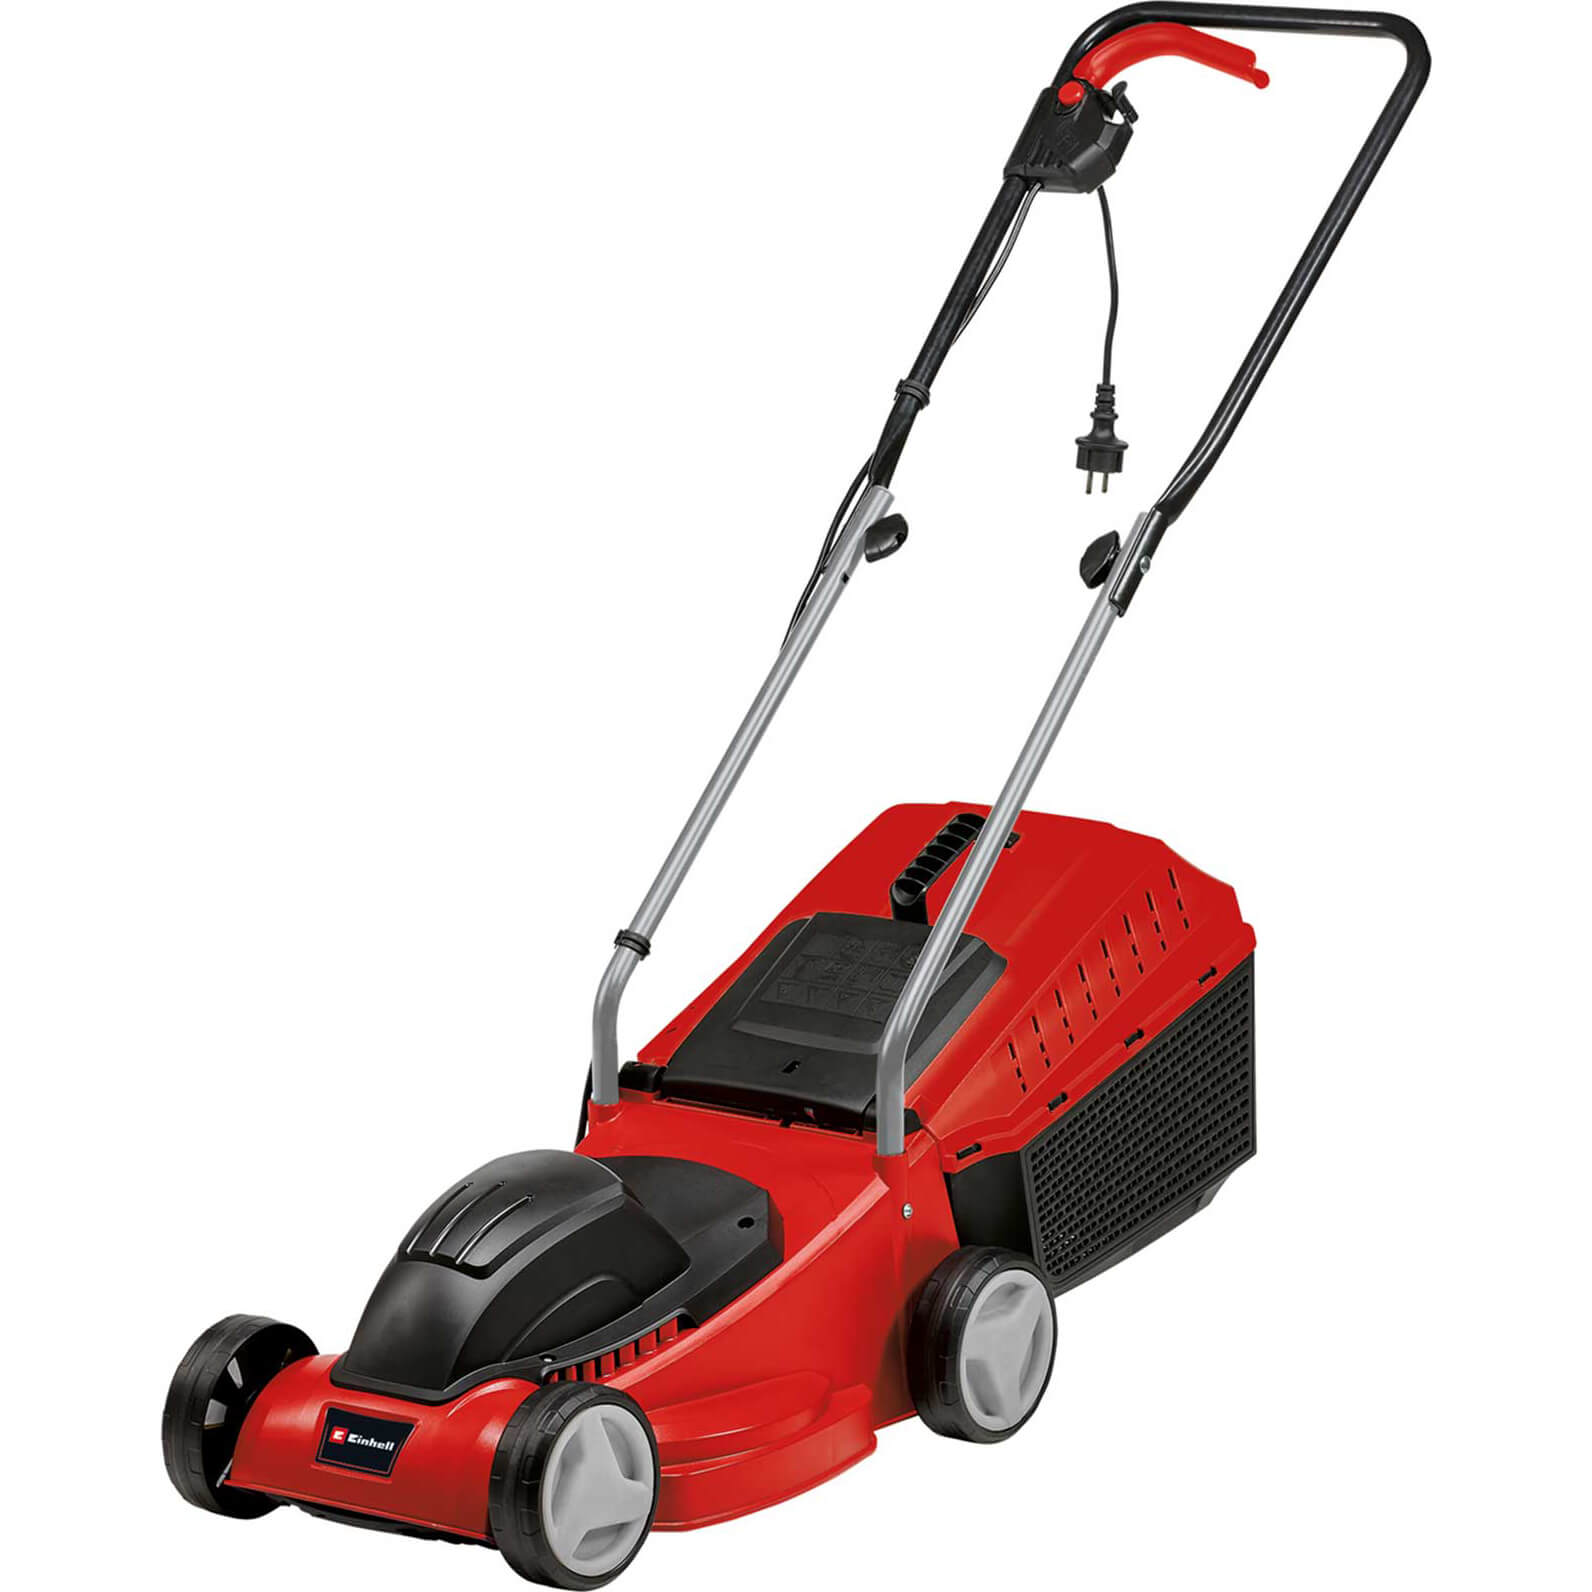 Image of Einhell GC-EM 1032 Electric Lawnmower 320mm